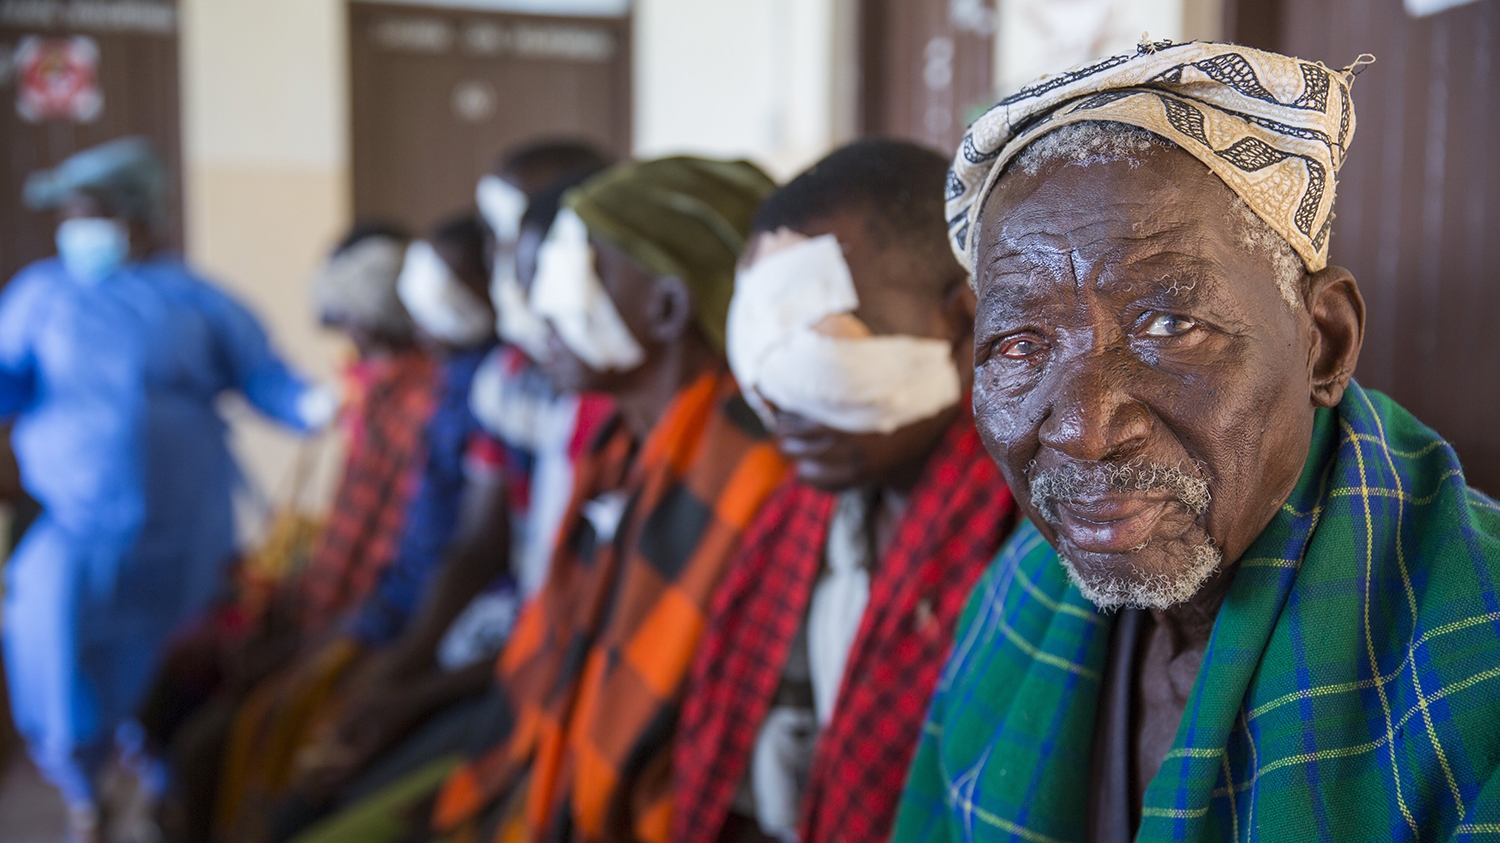 A older man sits in a waiting room alongside other people who have bandages on their eyes after receiving surgery.